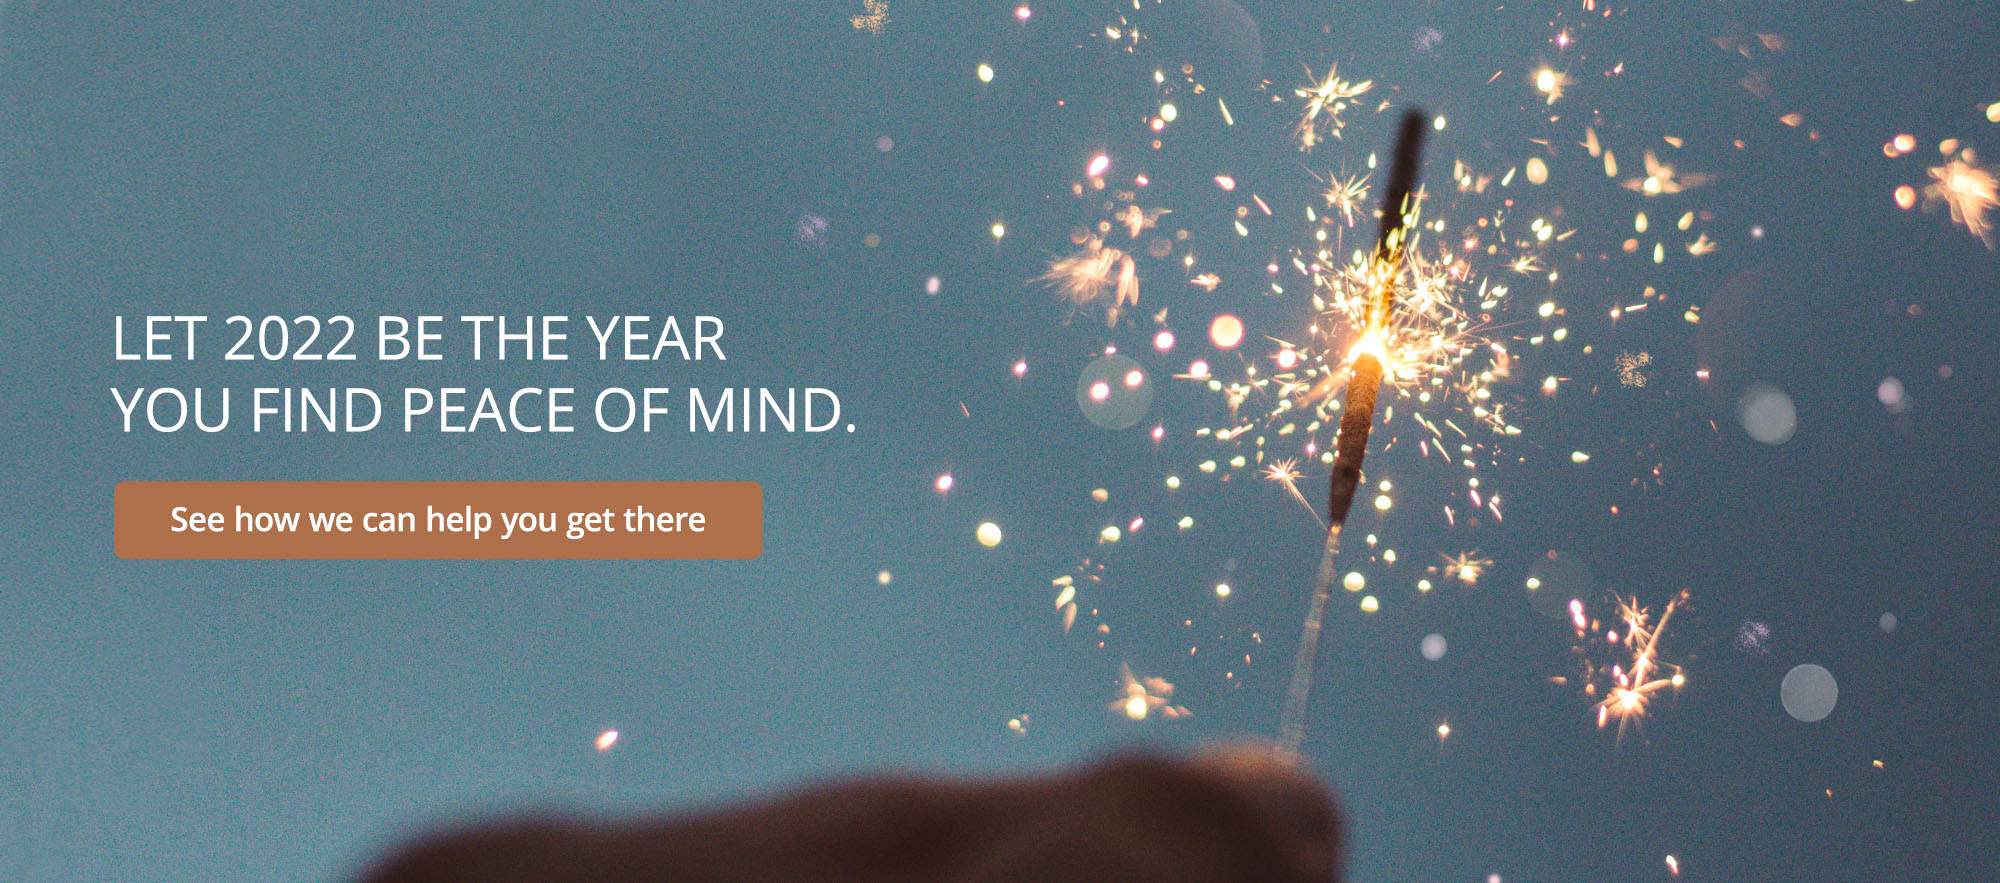 Let 2022 be the year you find peace of mind. See how we can help you get there.